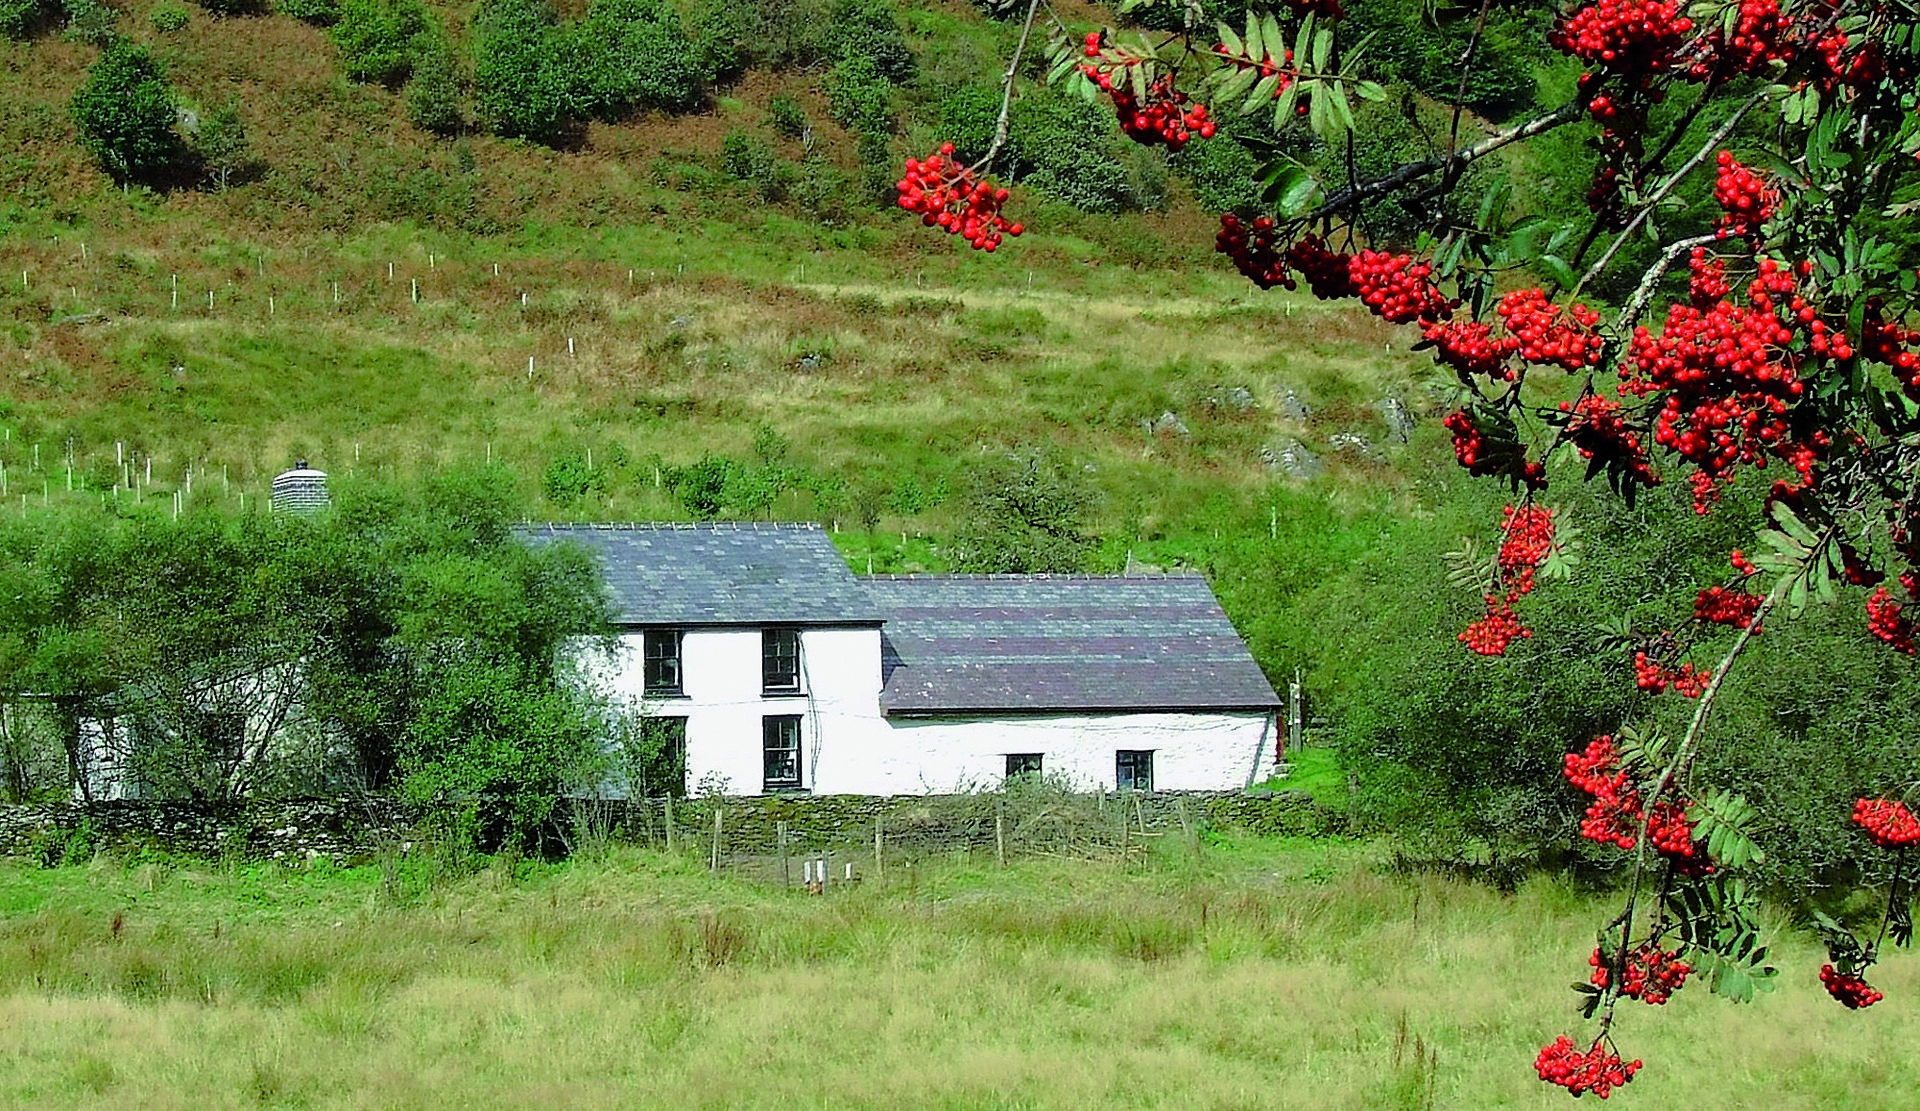 dolgoch hostel which is an ex youth hostel surrounded by greenery and red berries 